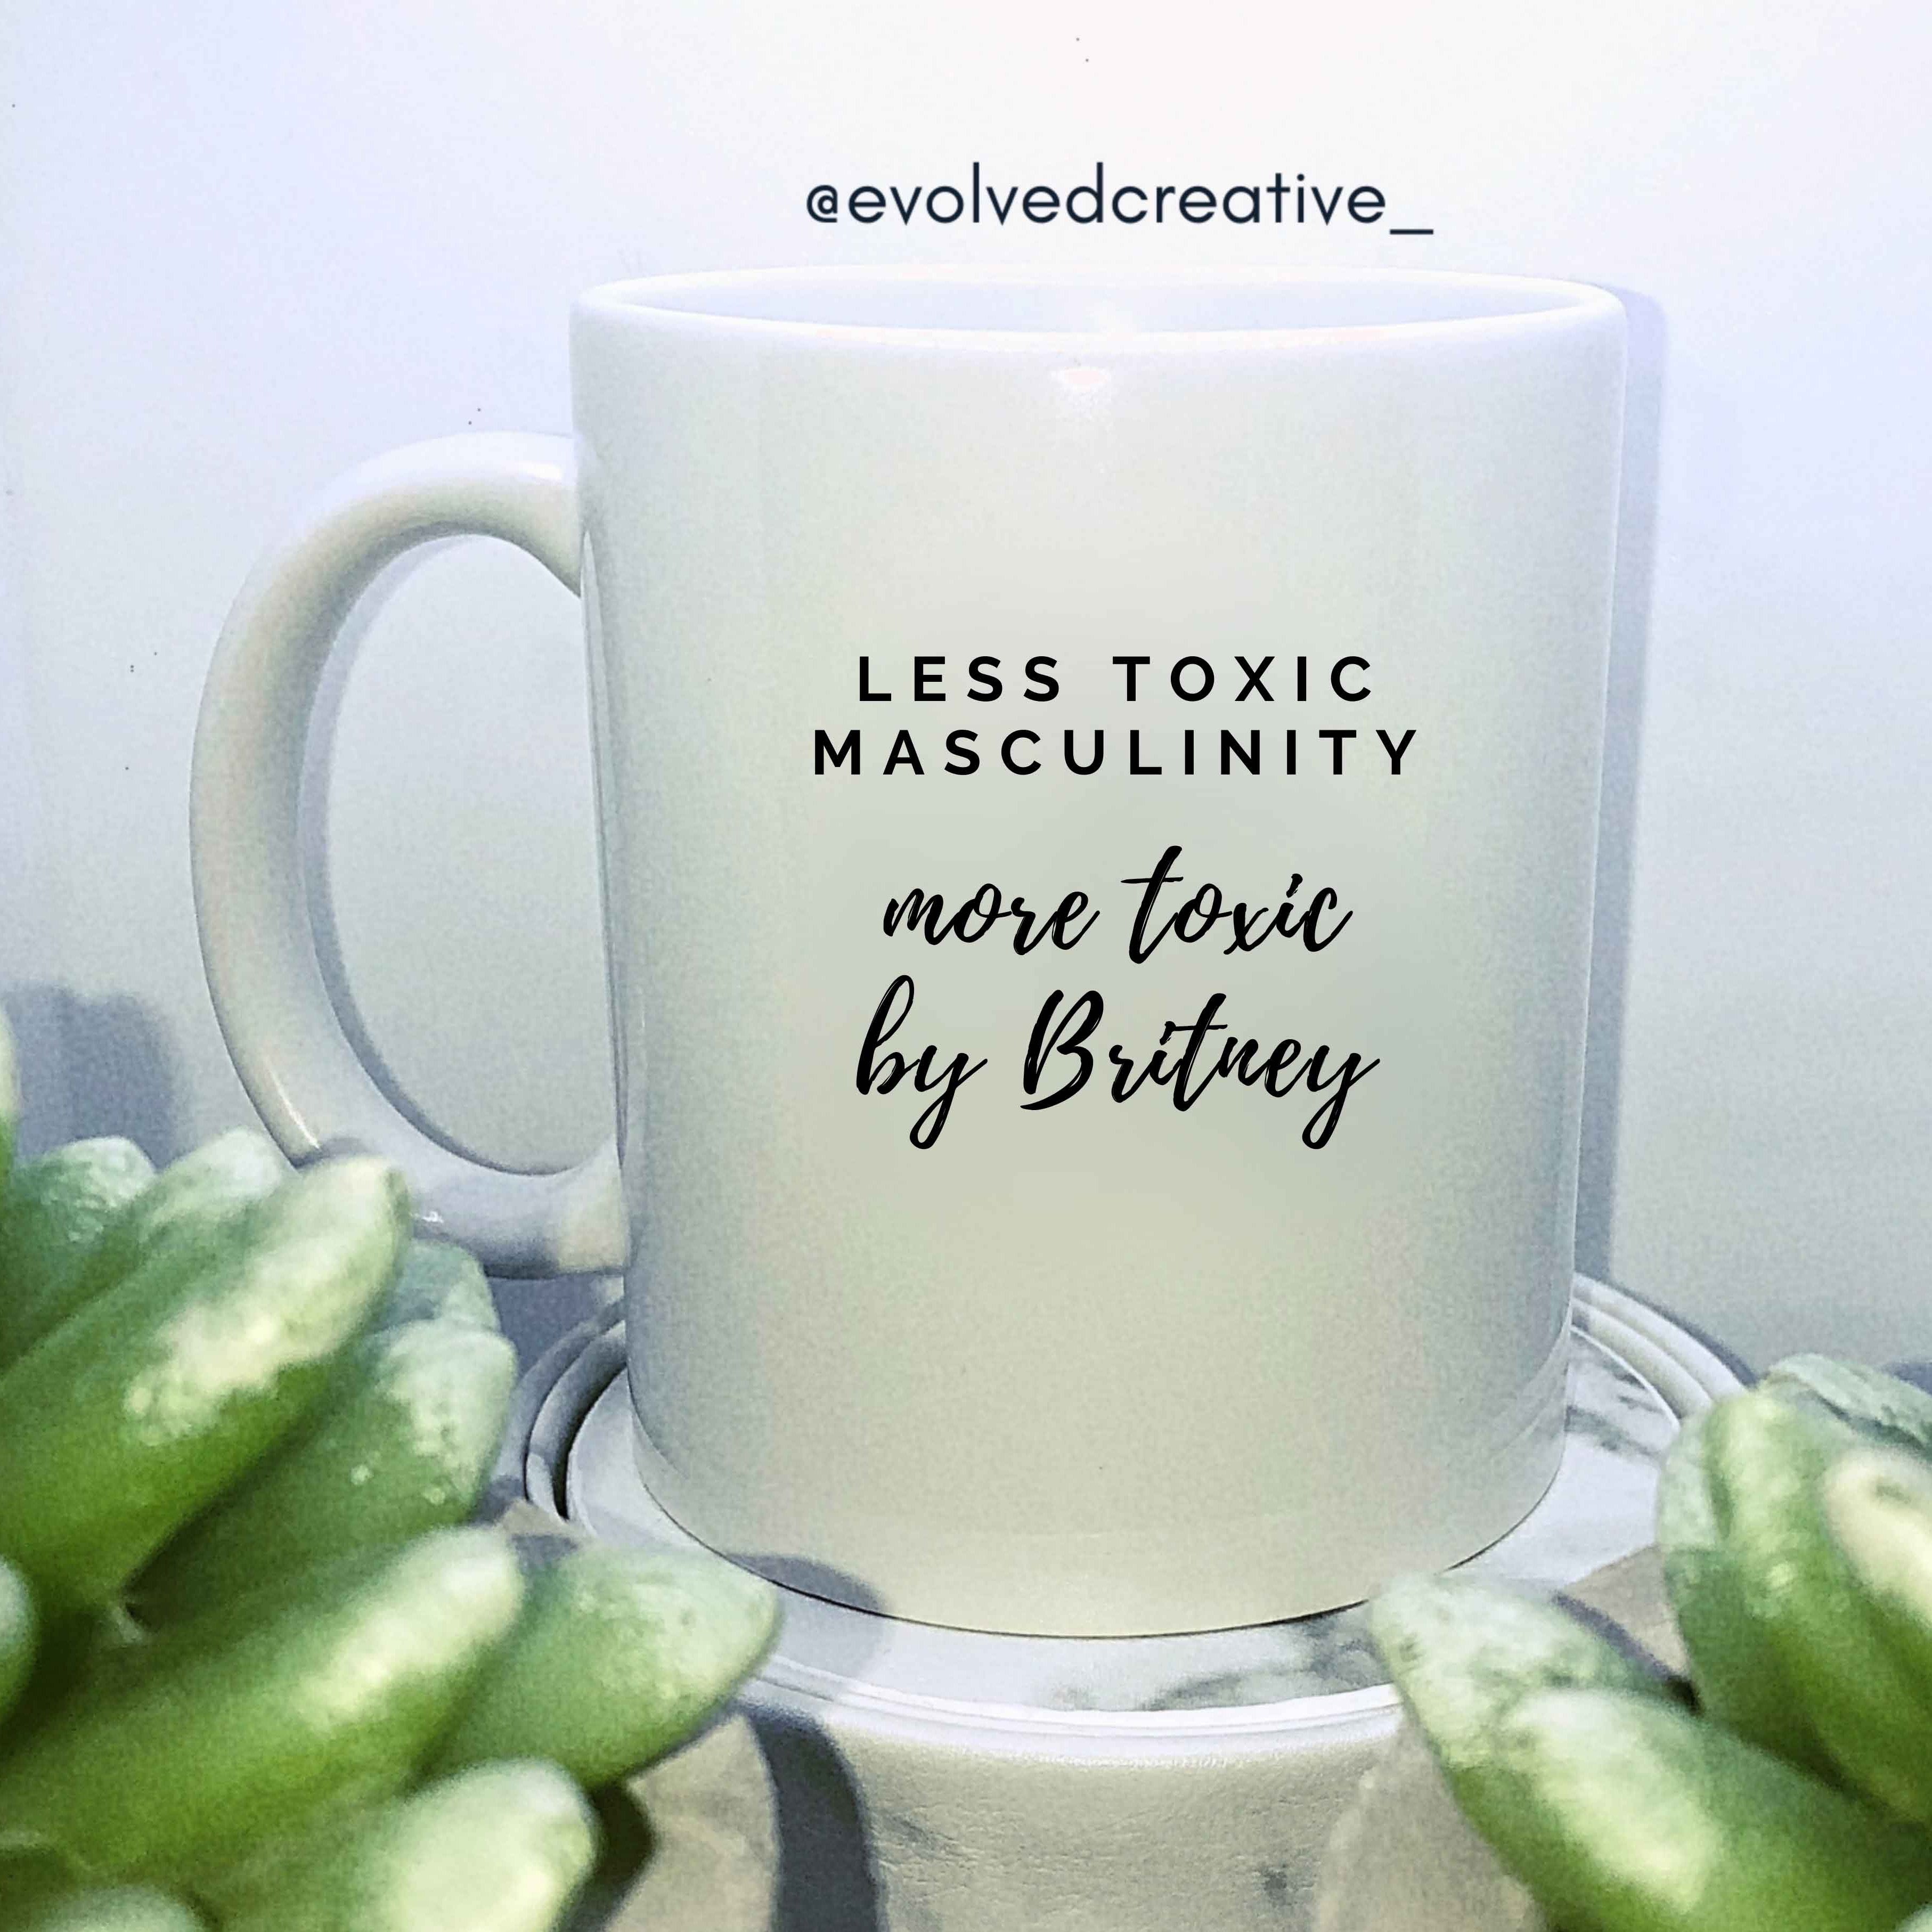 Mug that reads: Less toxic masculinity, more toxic by Britney